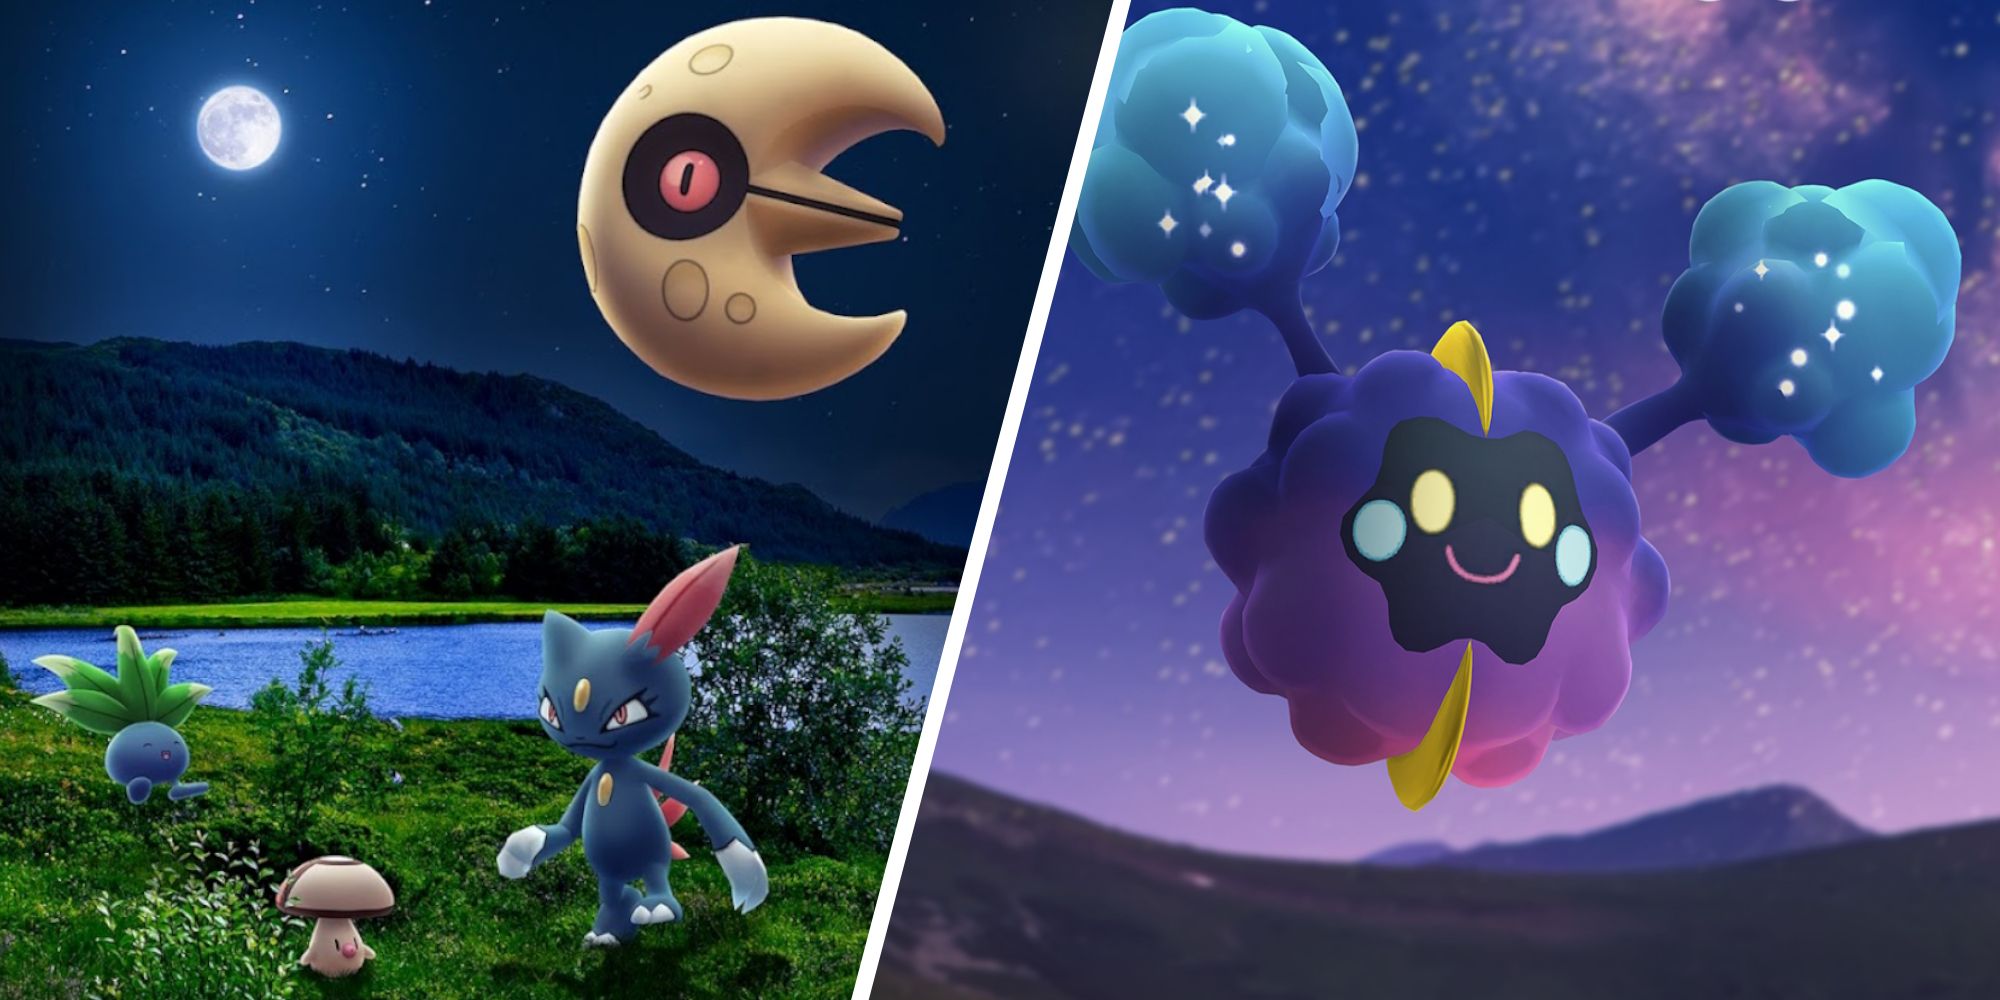 Spend the perfect day—or evening—with Pokémon during the Solstice